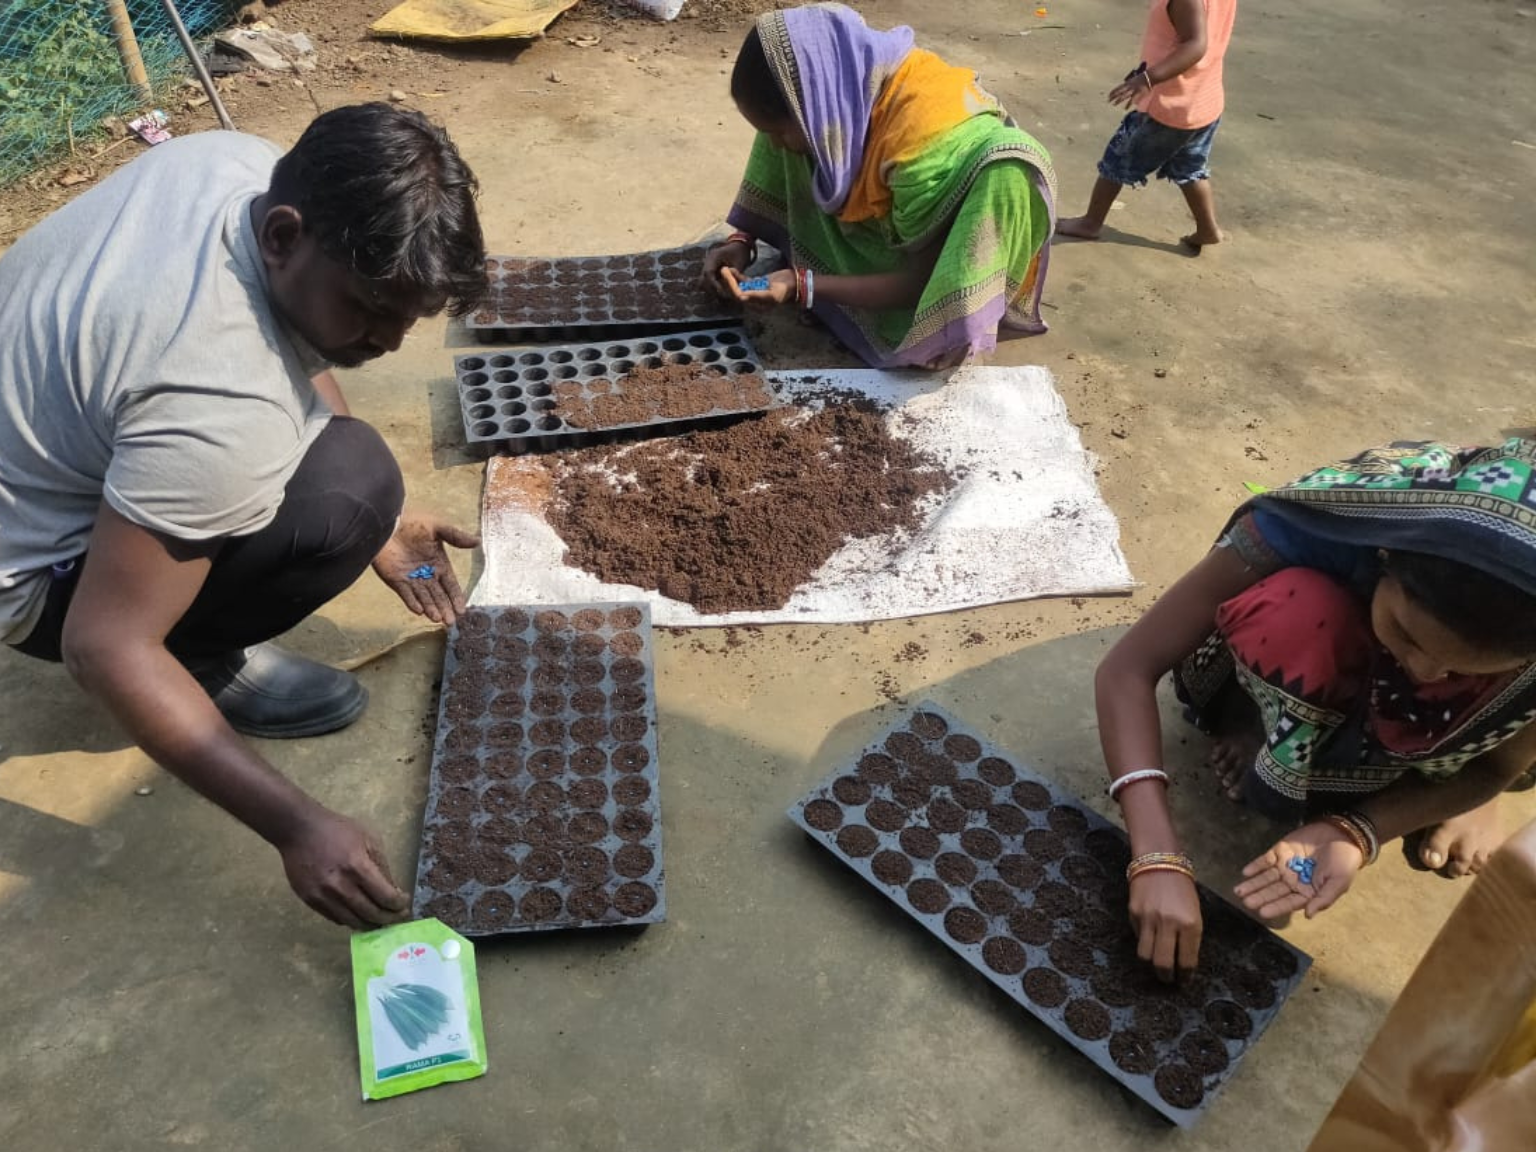 Indian farmers trained on seedling production through hands-on demonstration.